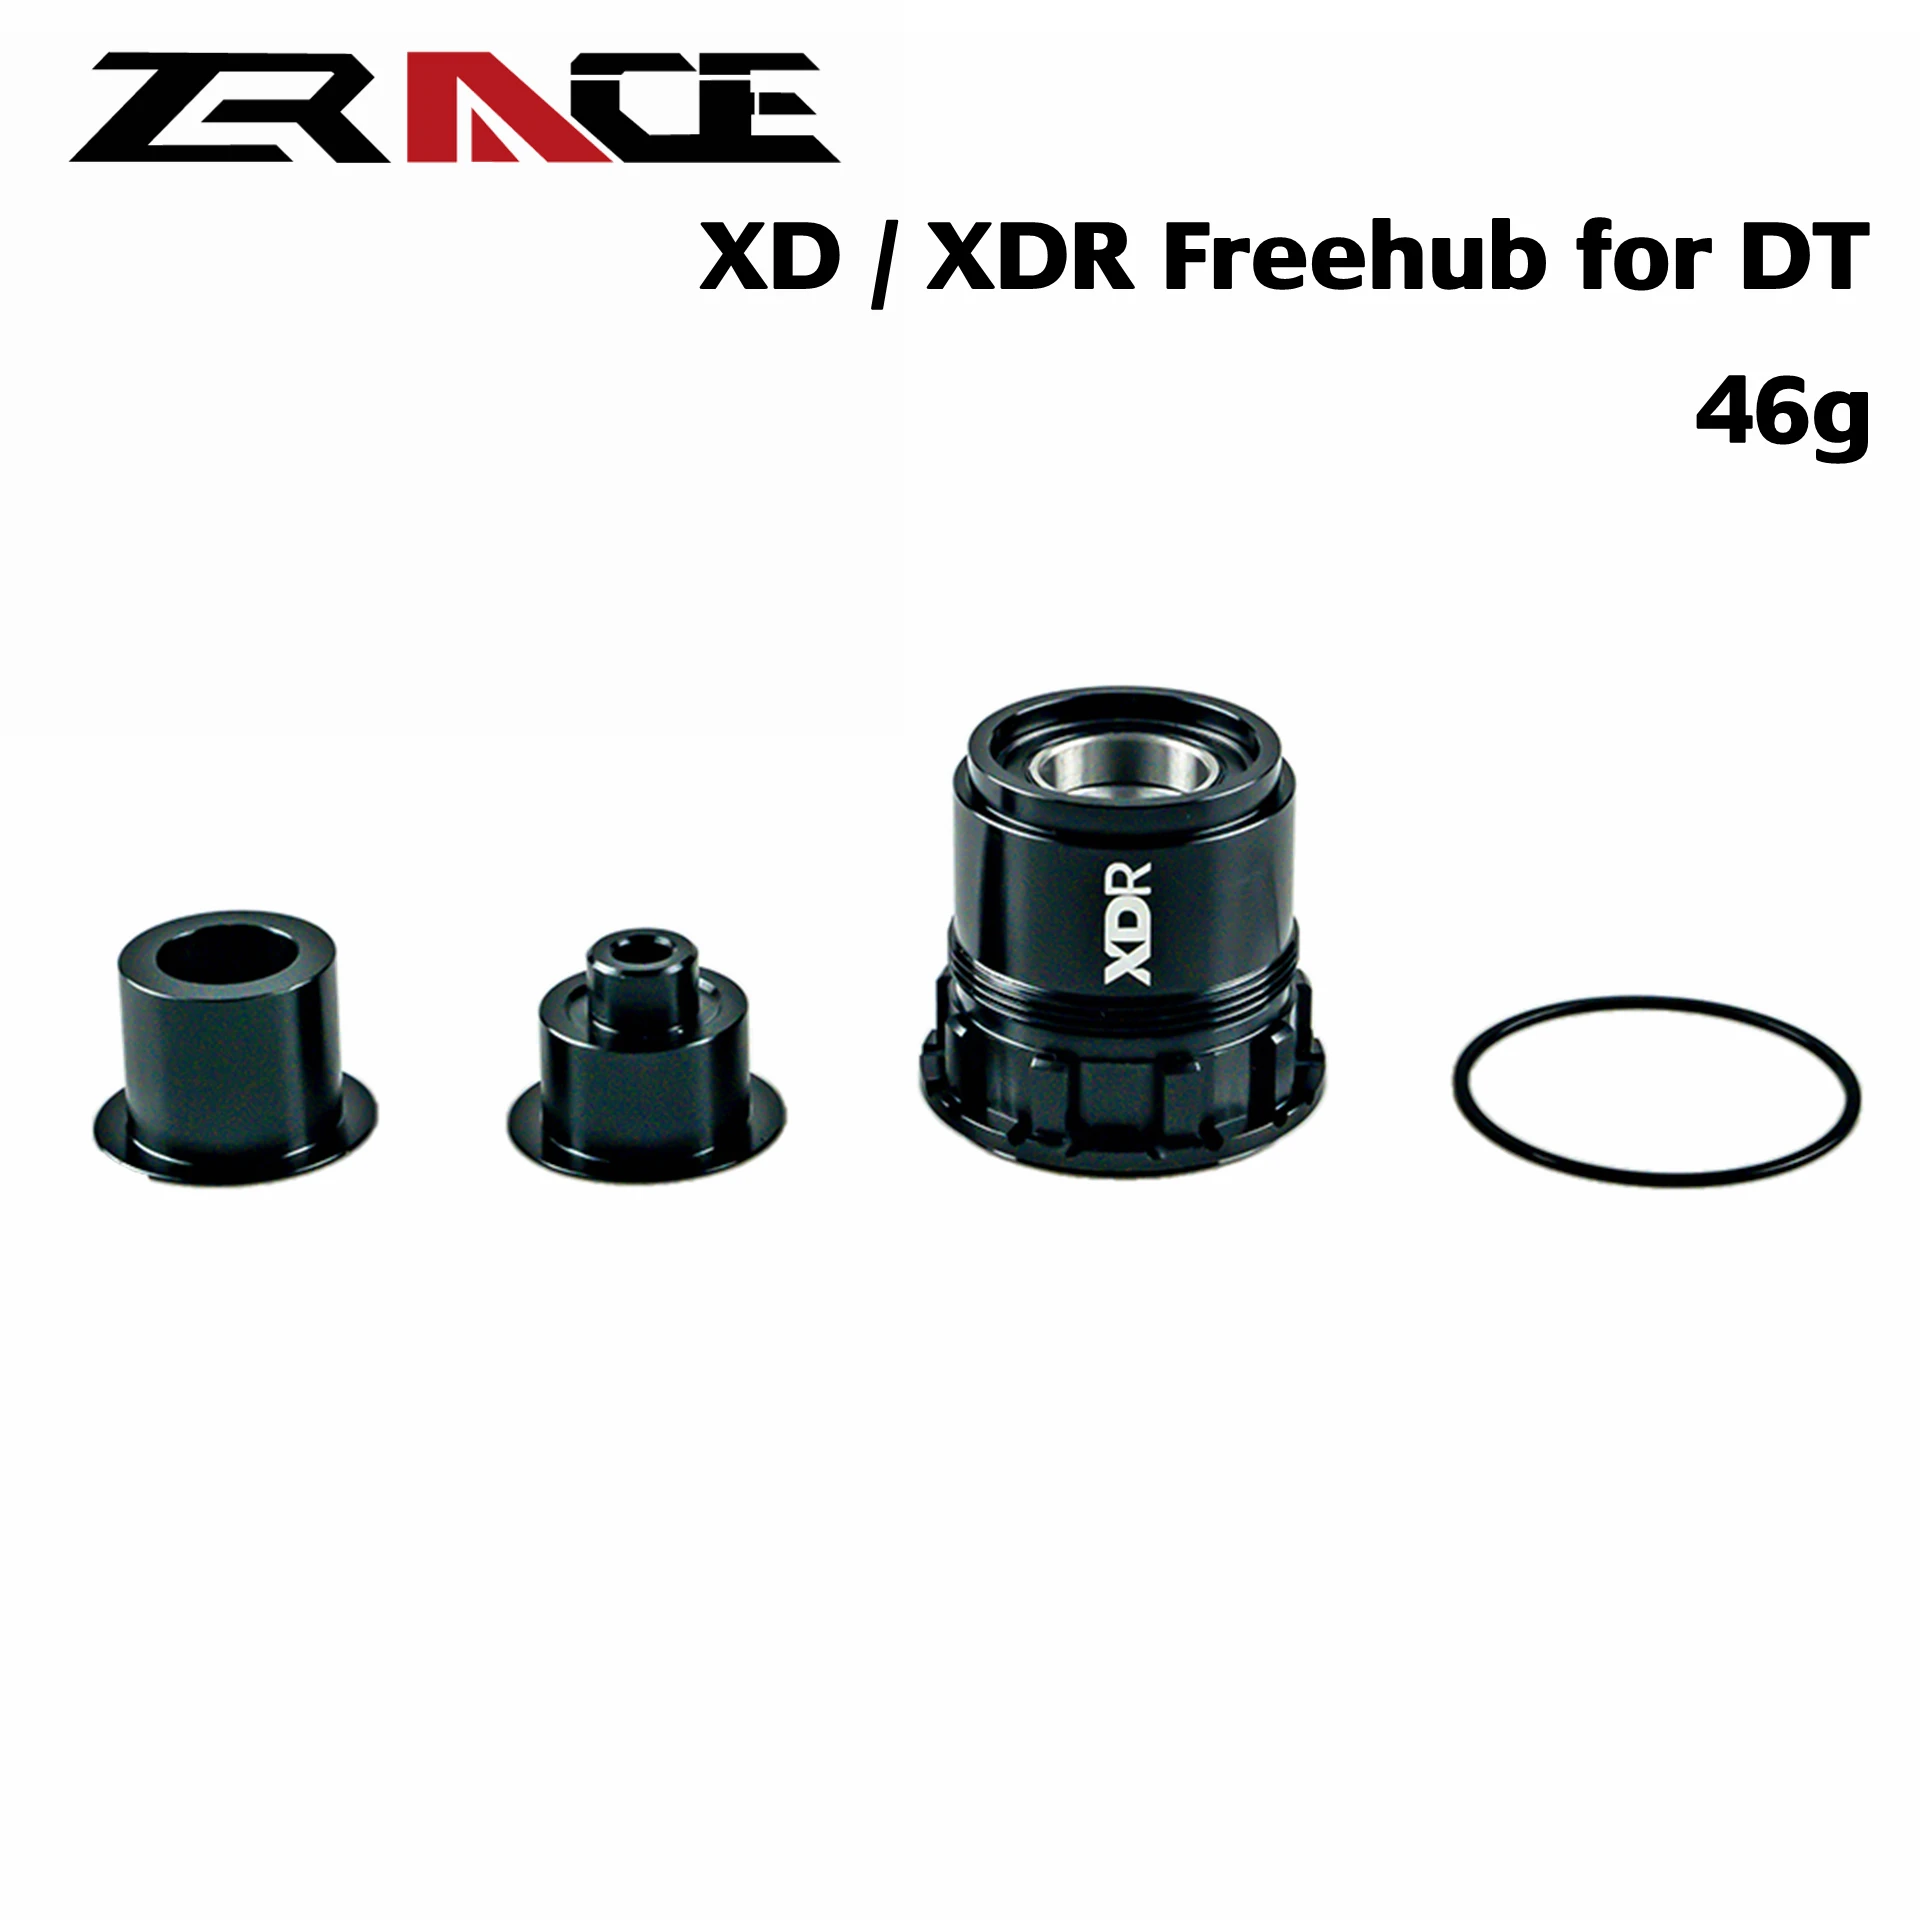 Dtスイスxd/xdrフリーハブ12スピードmtb for dtハブ240/350 Aliexpress